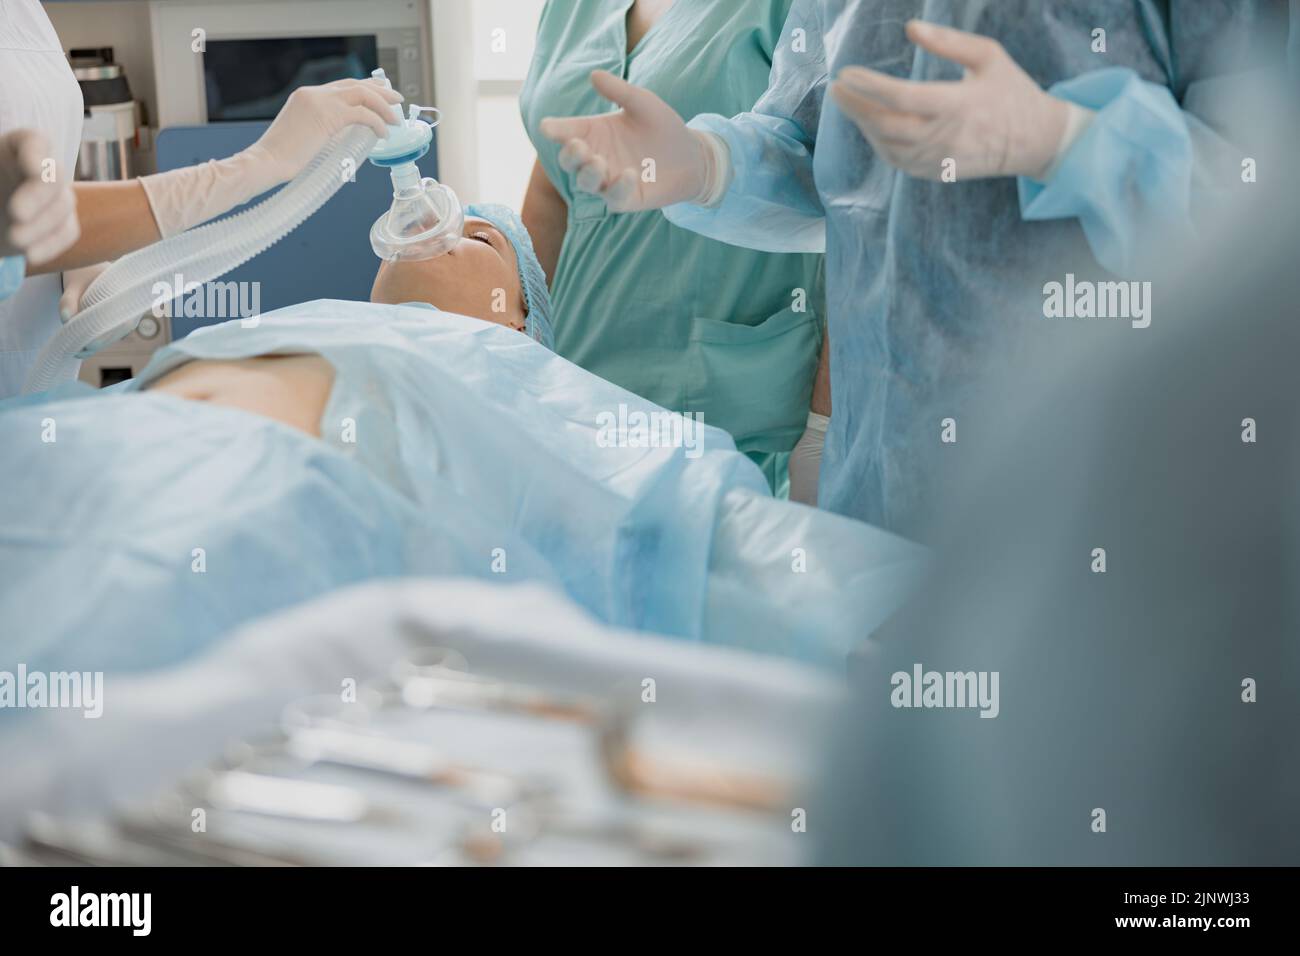 Close up hands of doctor anesthesiologist holding breathing mask on patient face during operation Stock Photo